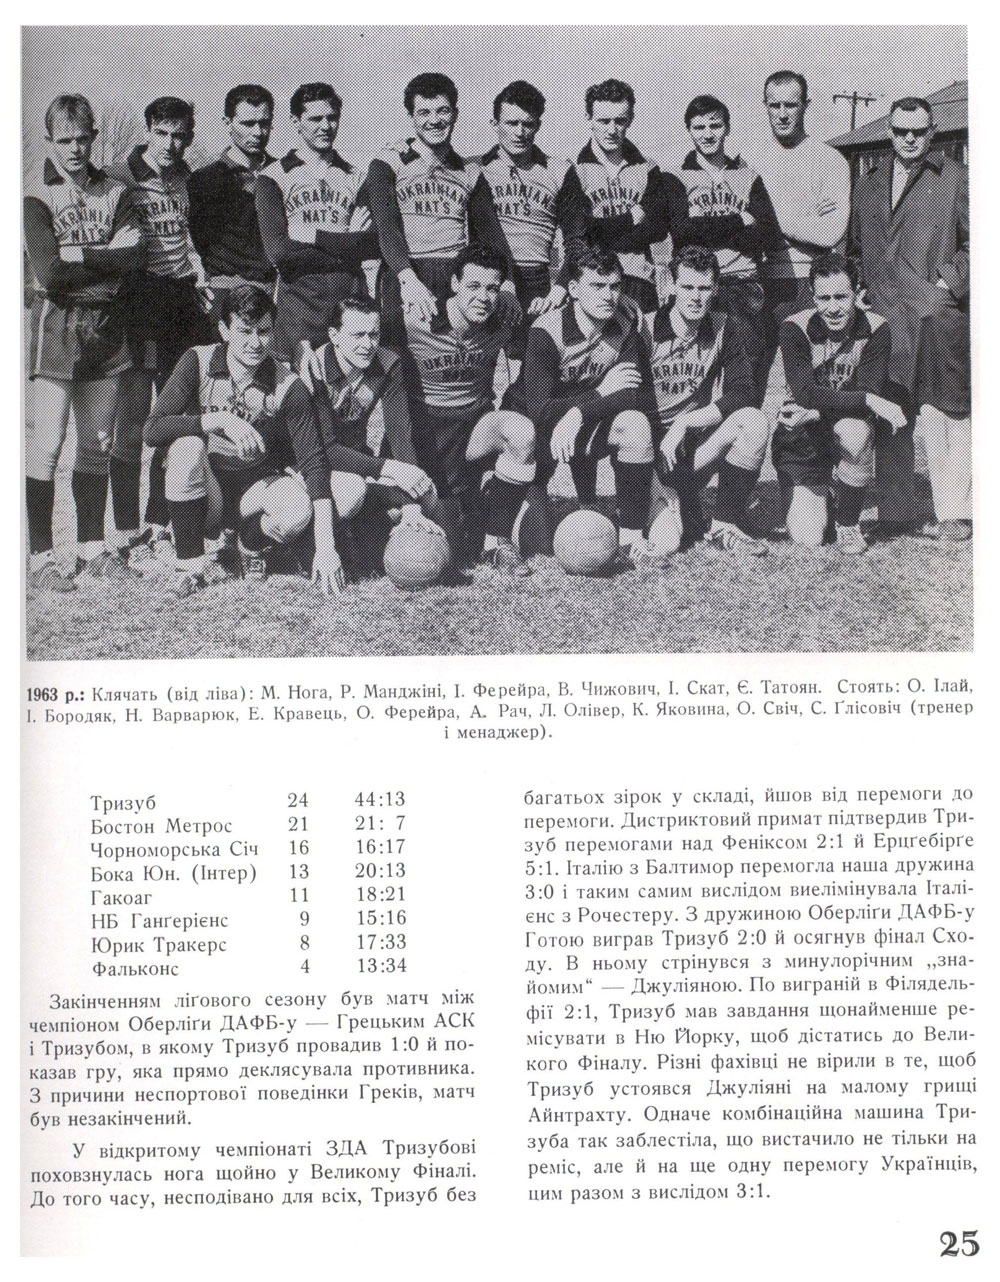 1963 Ukrainian nationals team (finalists for the Cup)